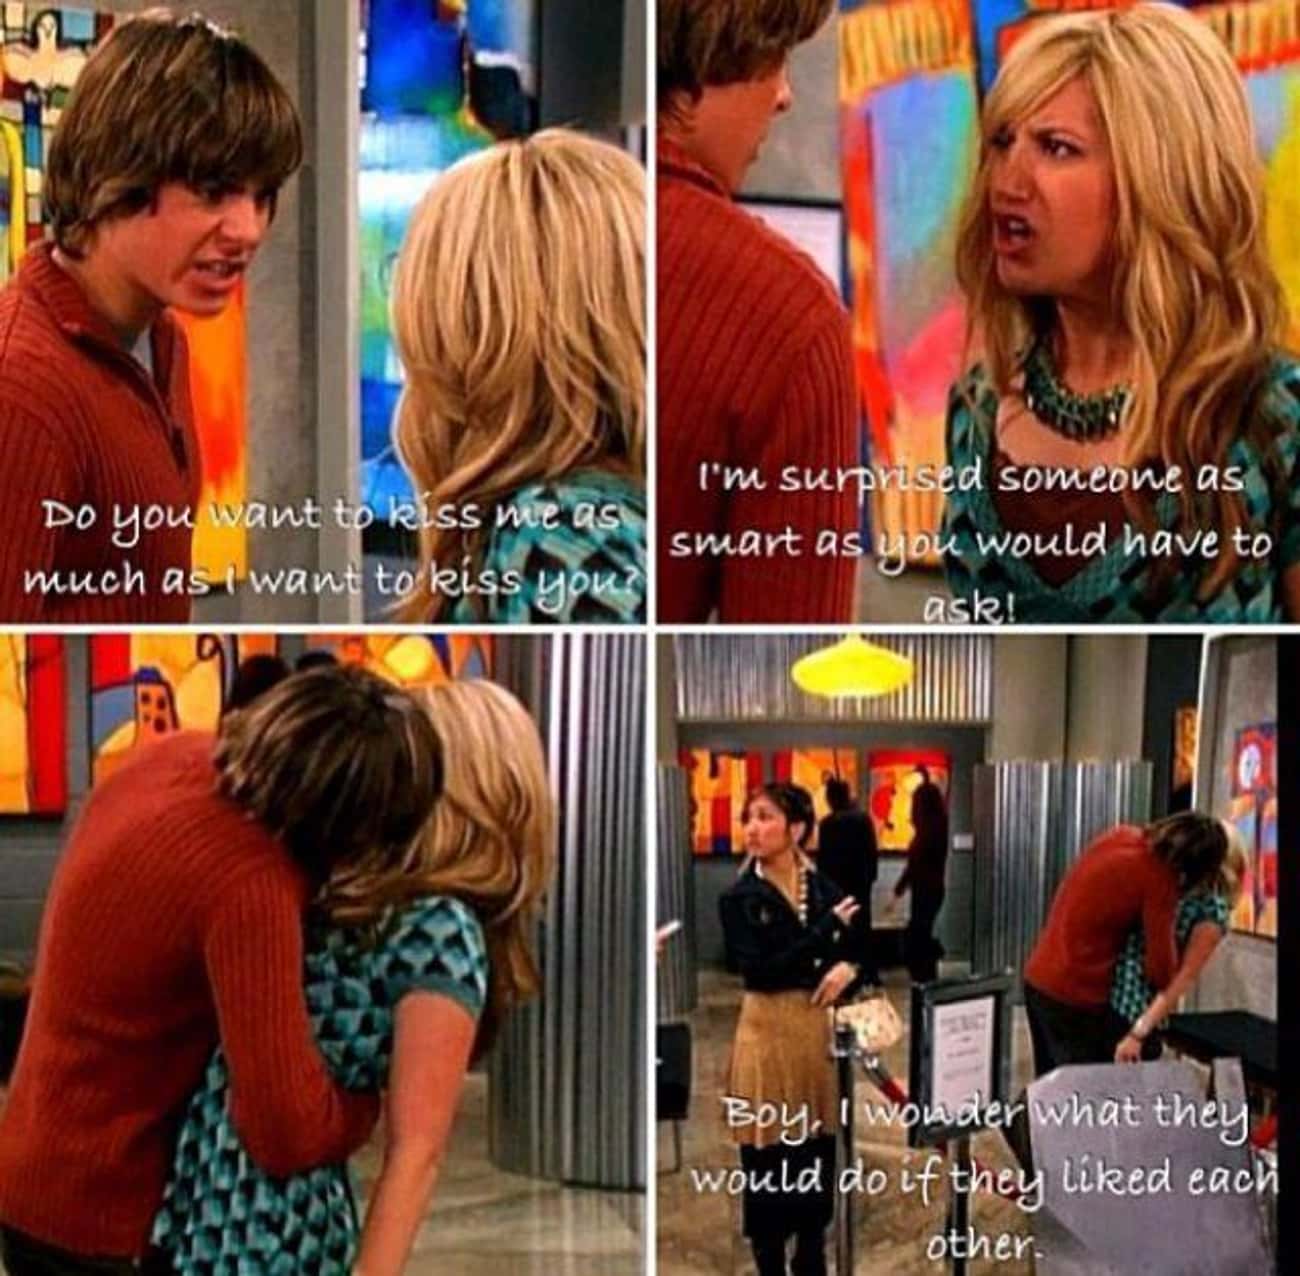 They like each other. Troy and Sharpay фанфики. Maddie from Zack and code.